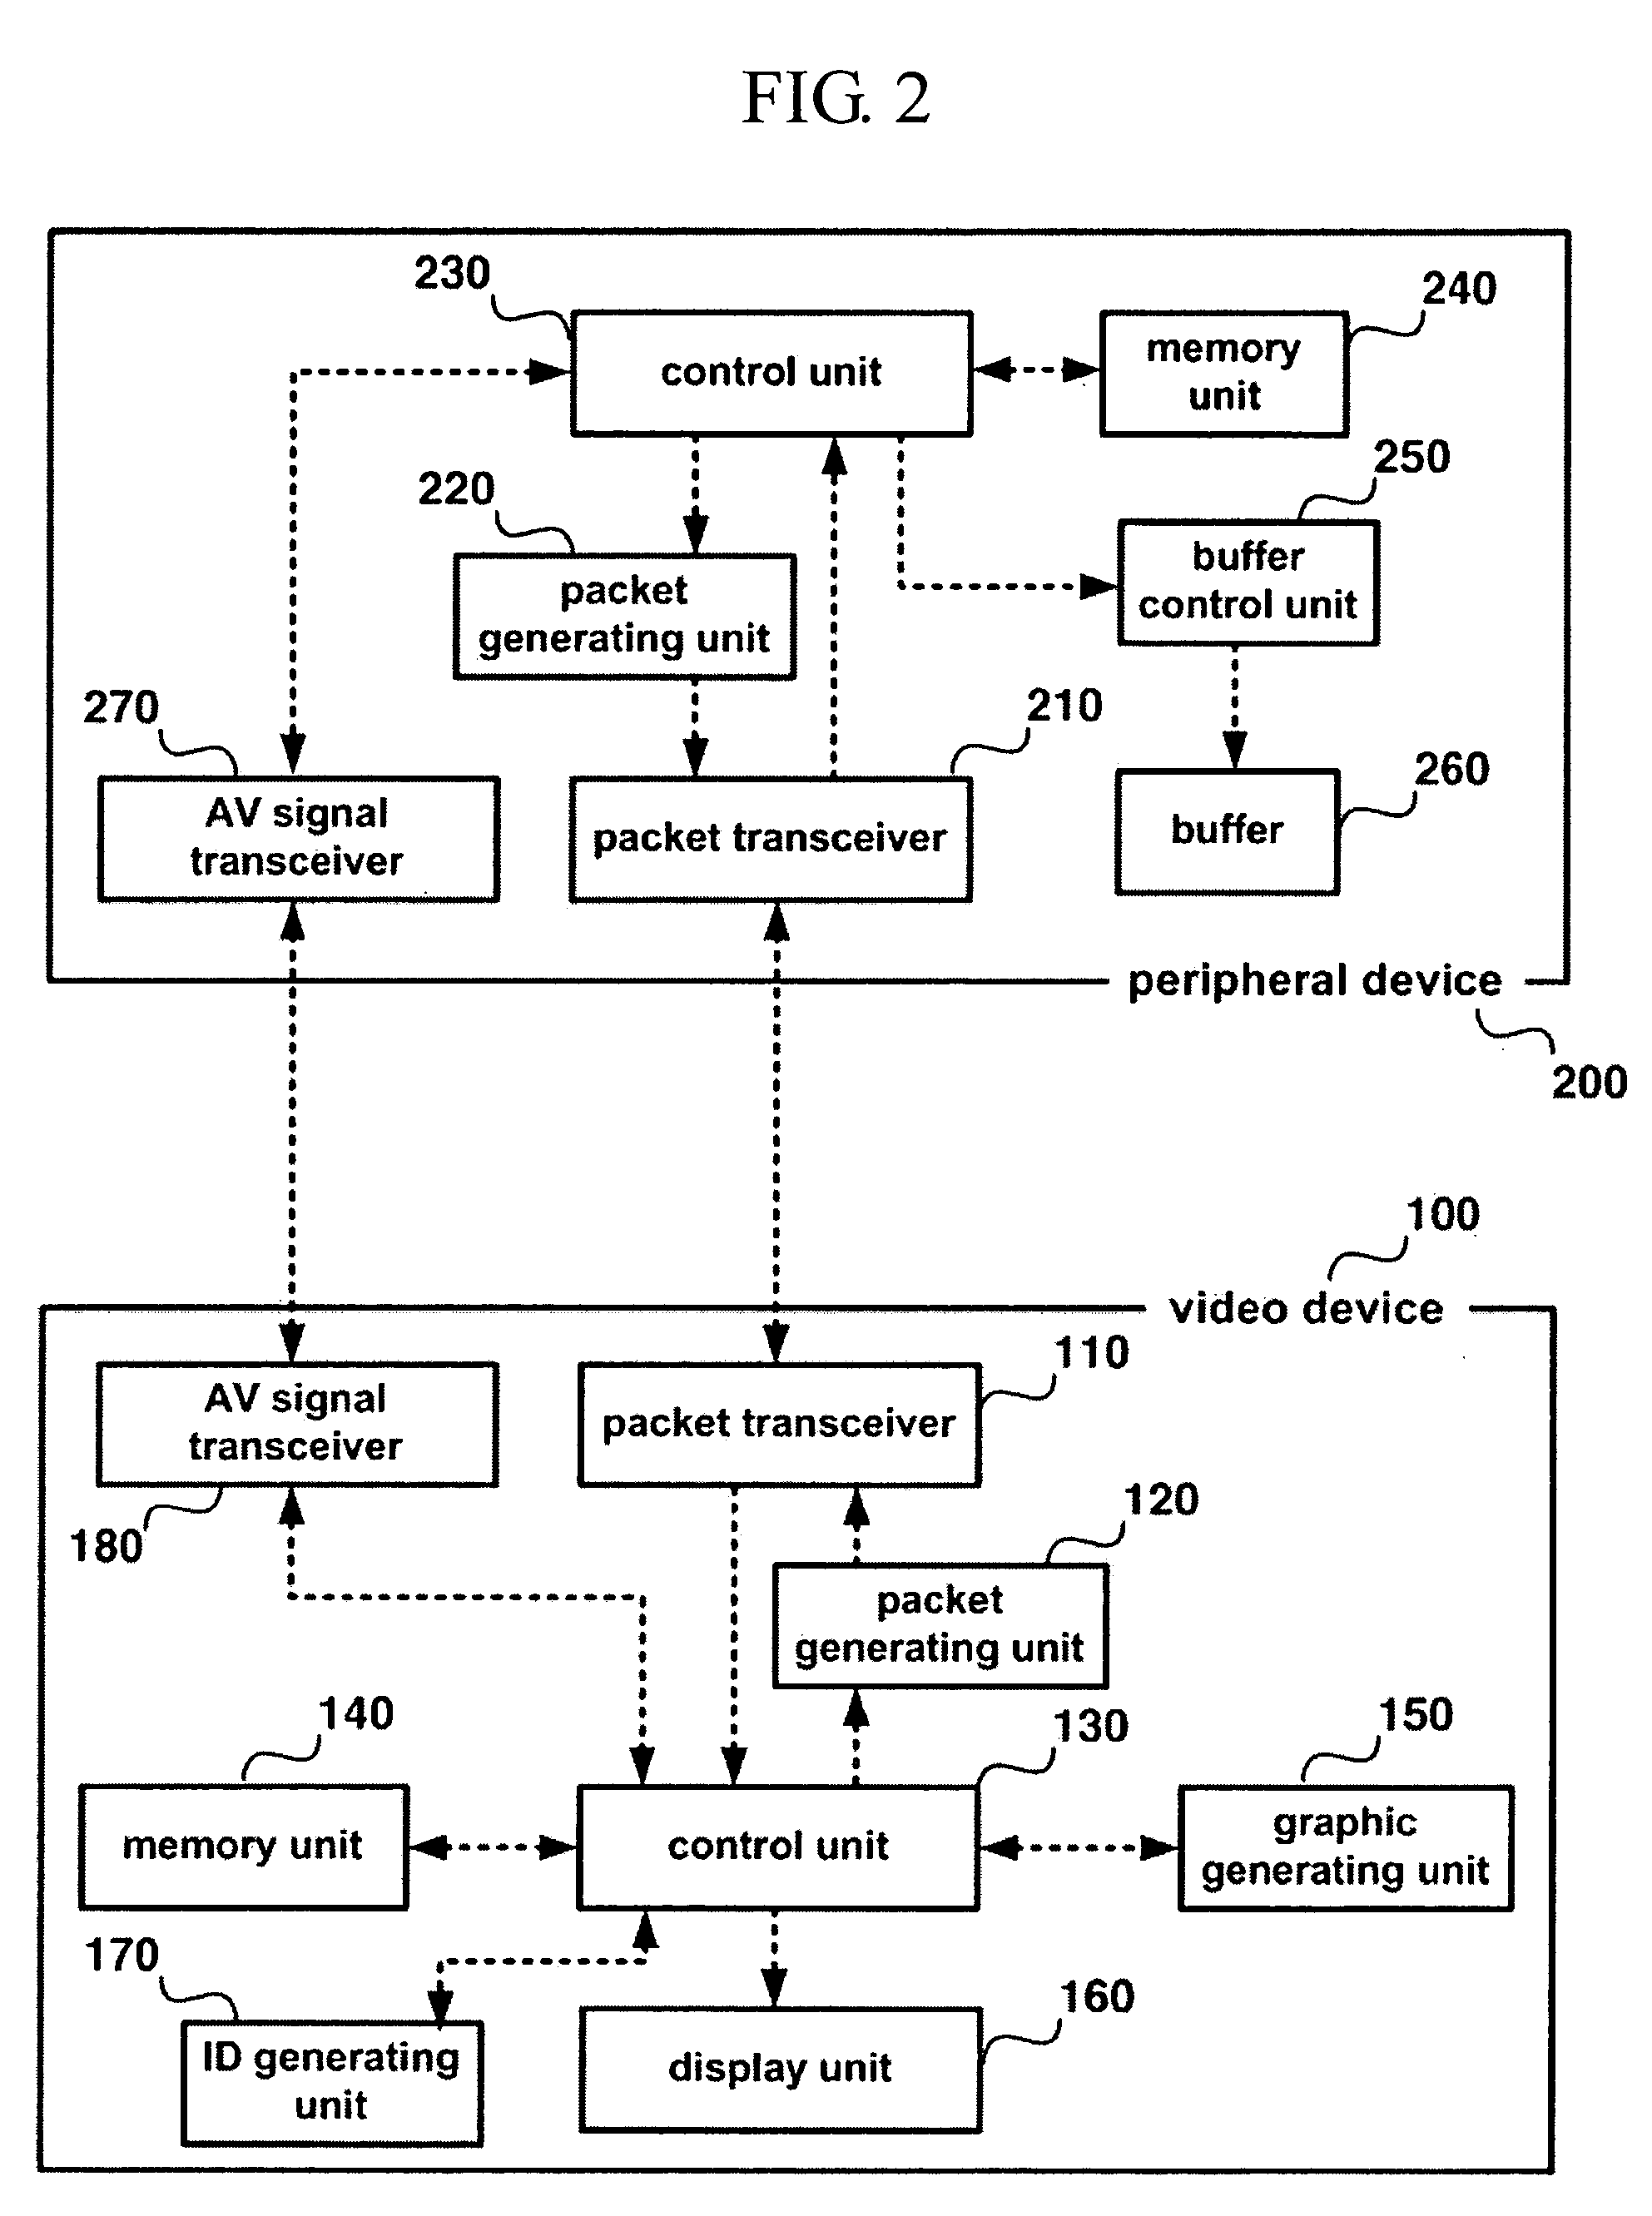 Method and system for controlling peripheral devices connected to a video device